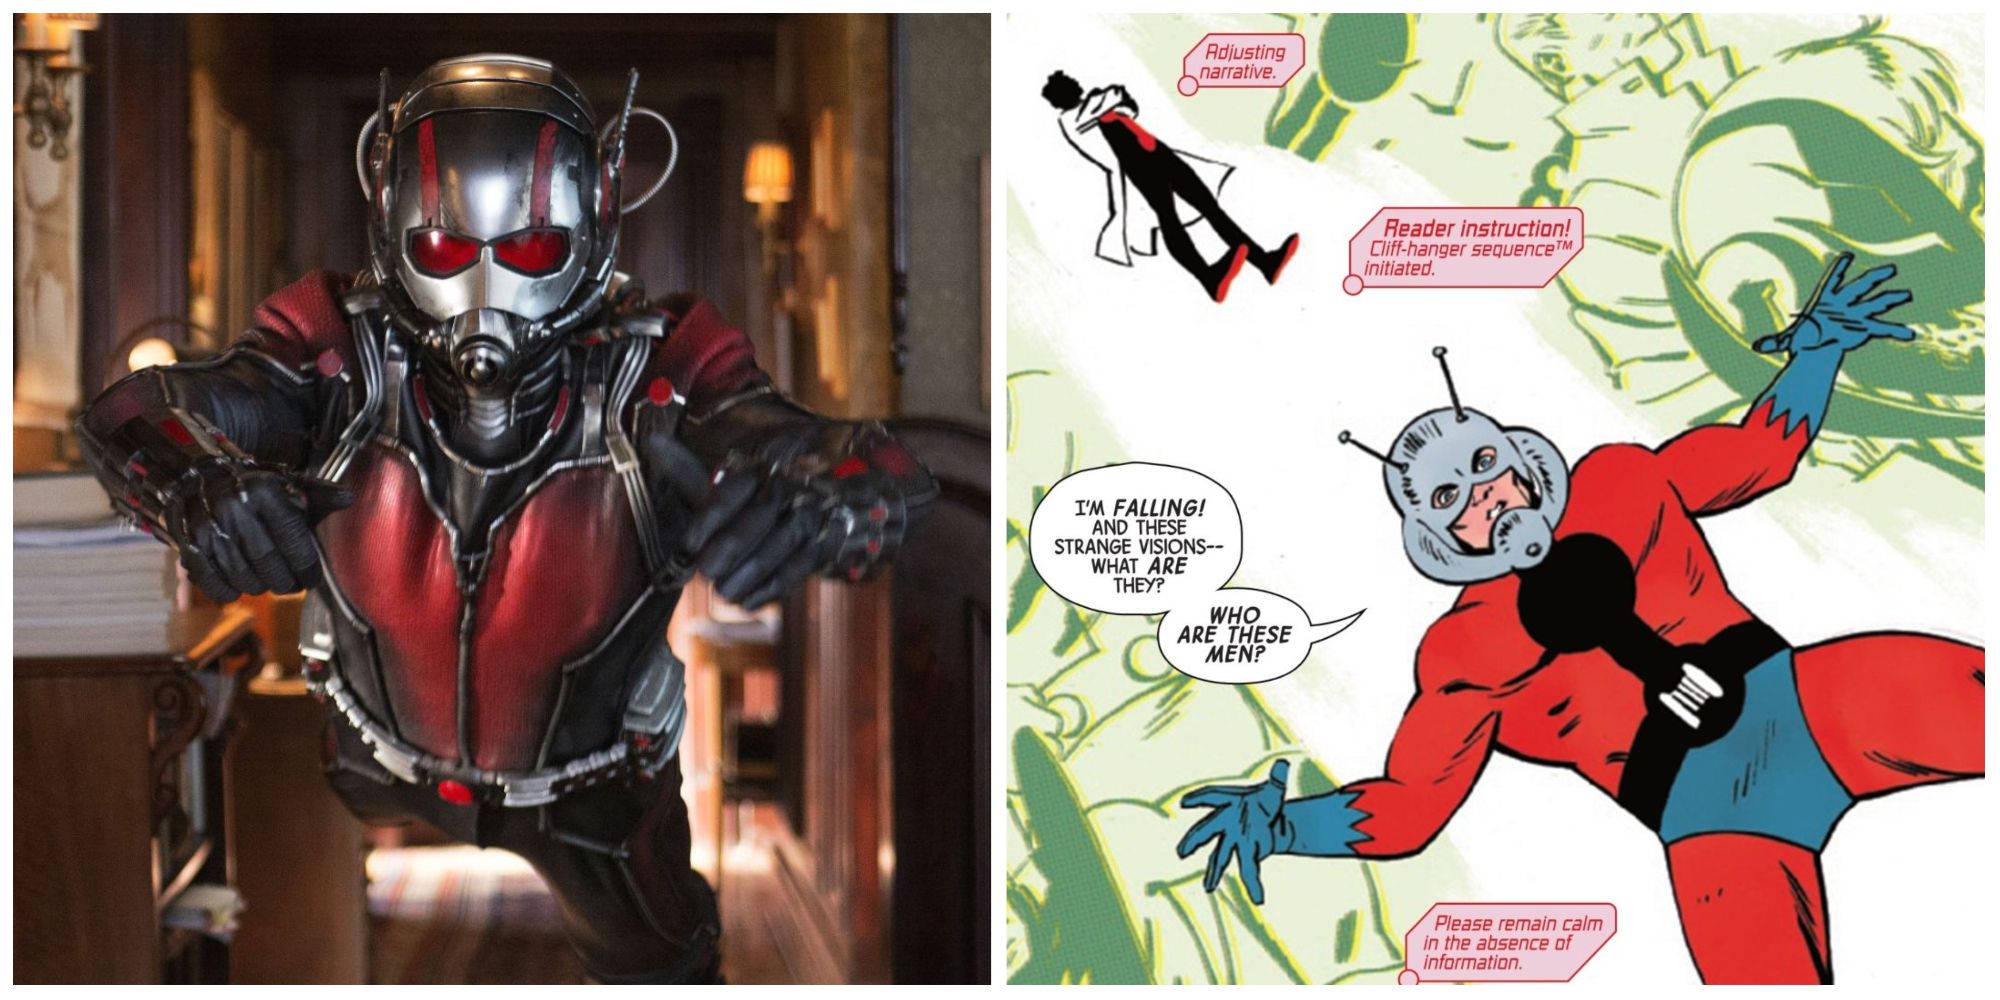 A split image of Ant-Man in the MCU and Ant-Man falling into the Microverse in Marvel Comics